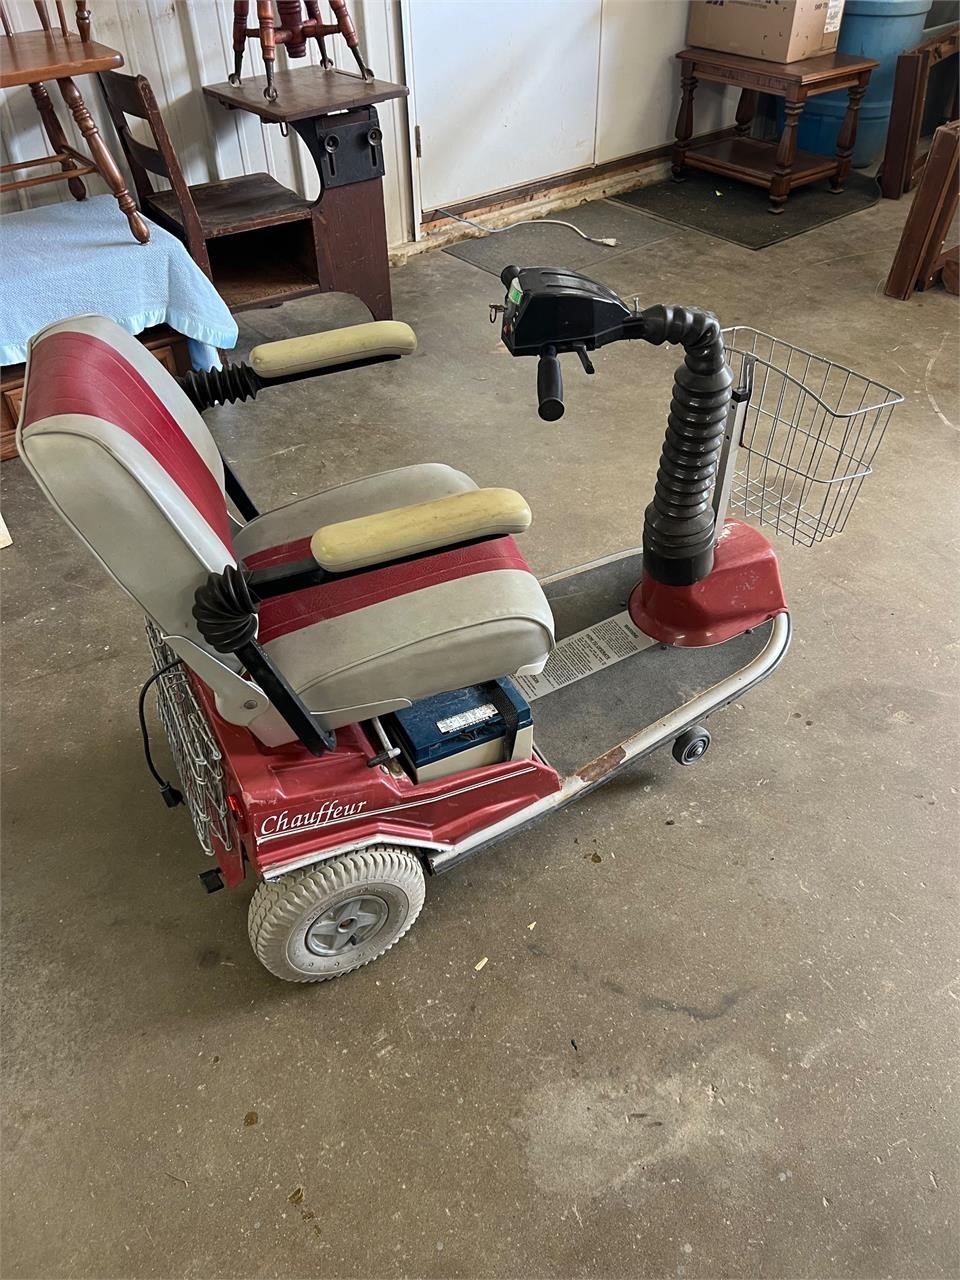 Scooter/Grocery Getter works well & Charges